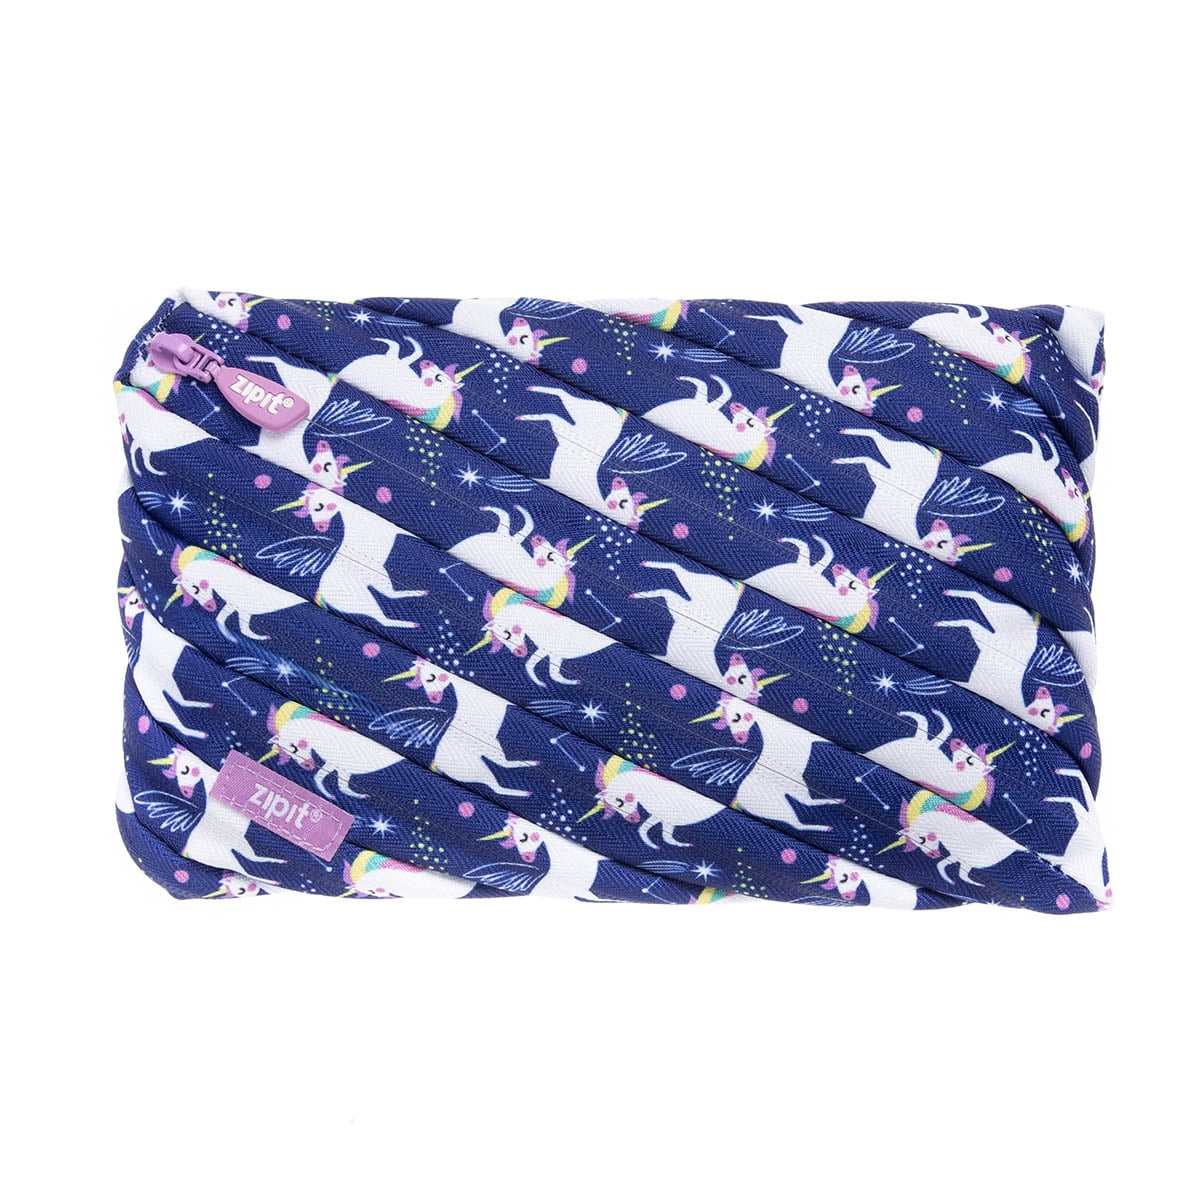 Zipit Unicorn Pencil Case for Girls, Cute Pencil Pouch, Made of One Long Zipper! (Turquoise Unicorn)